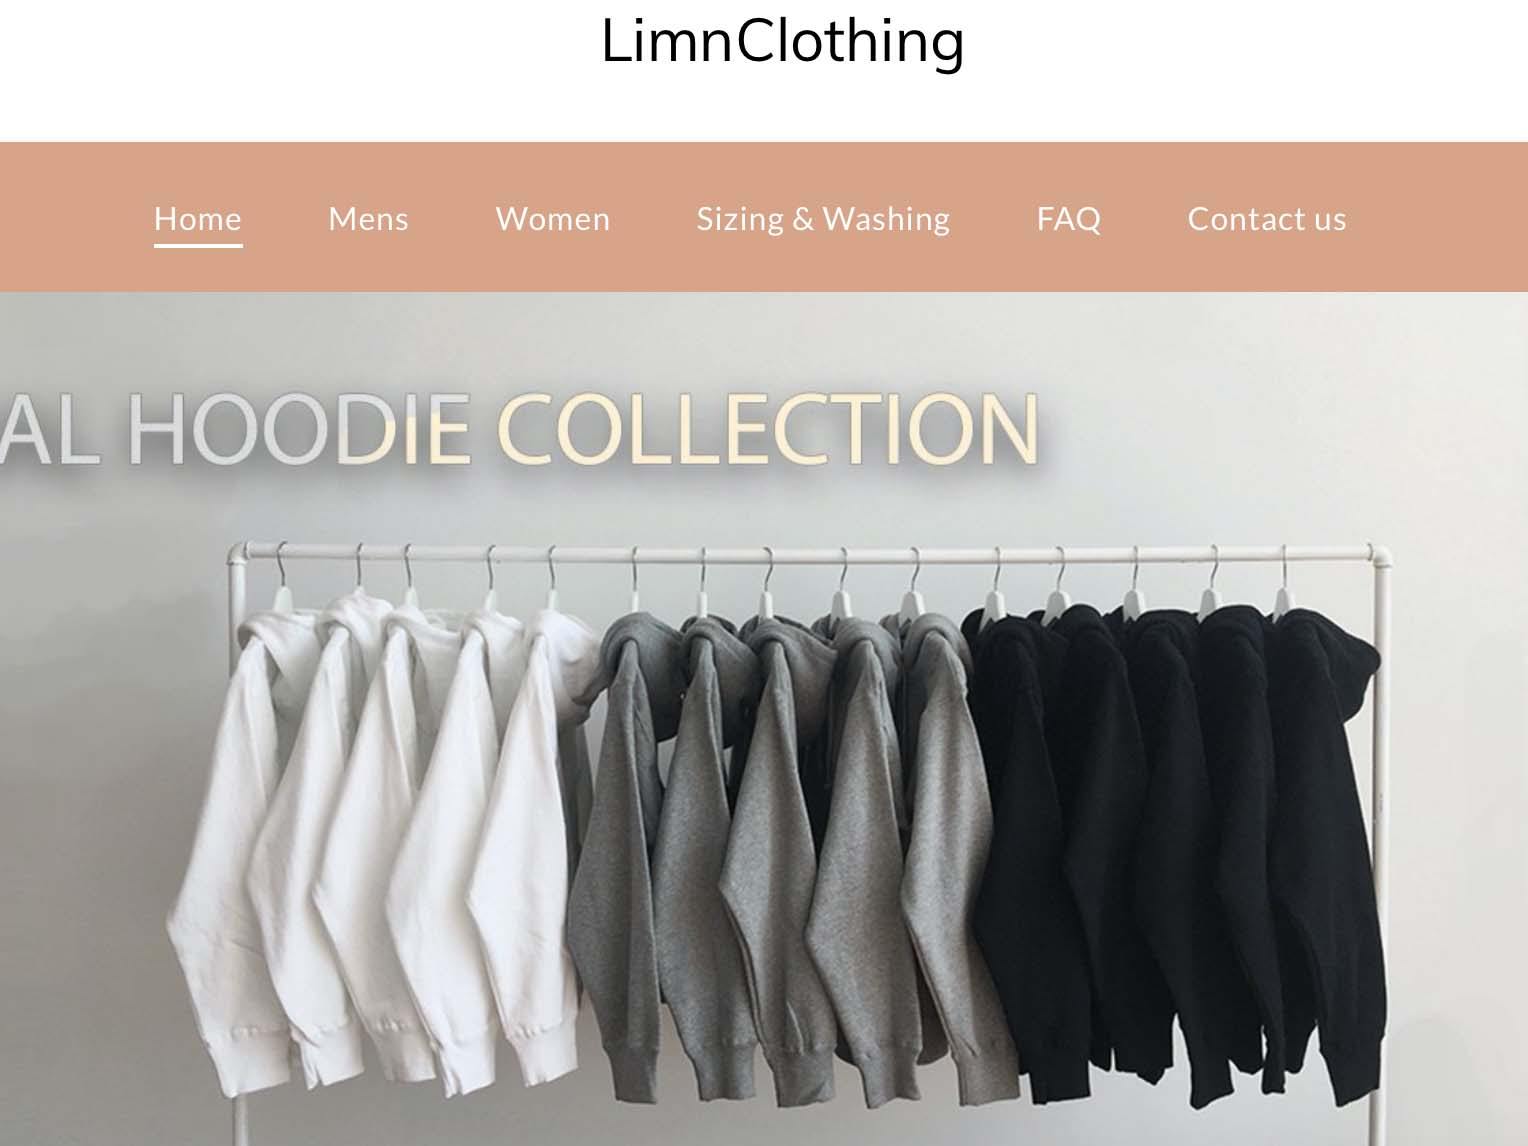 New site Look! - LimnClothing